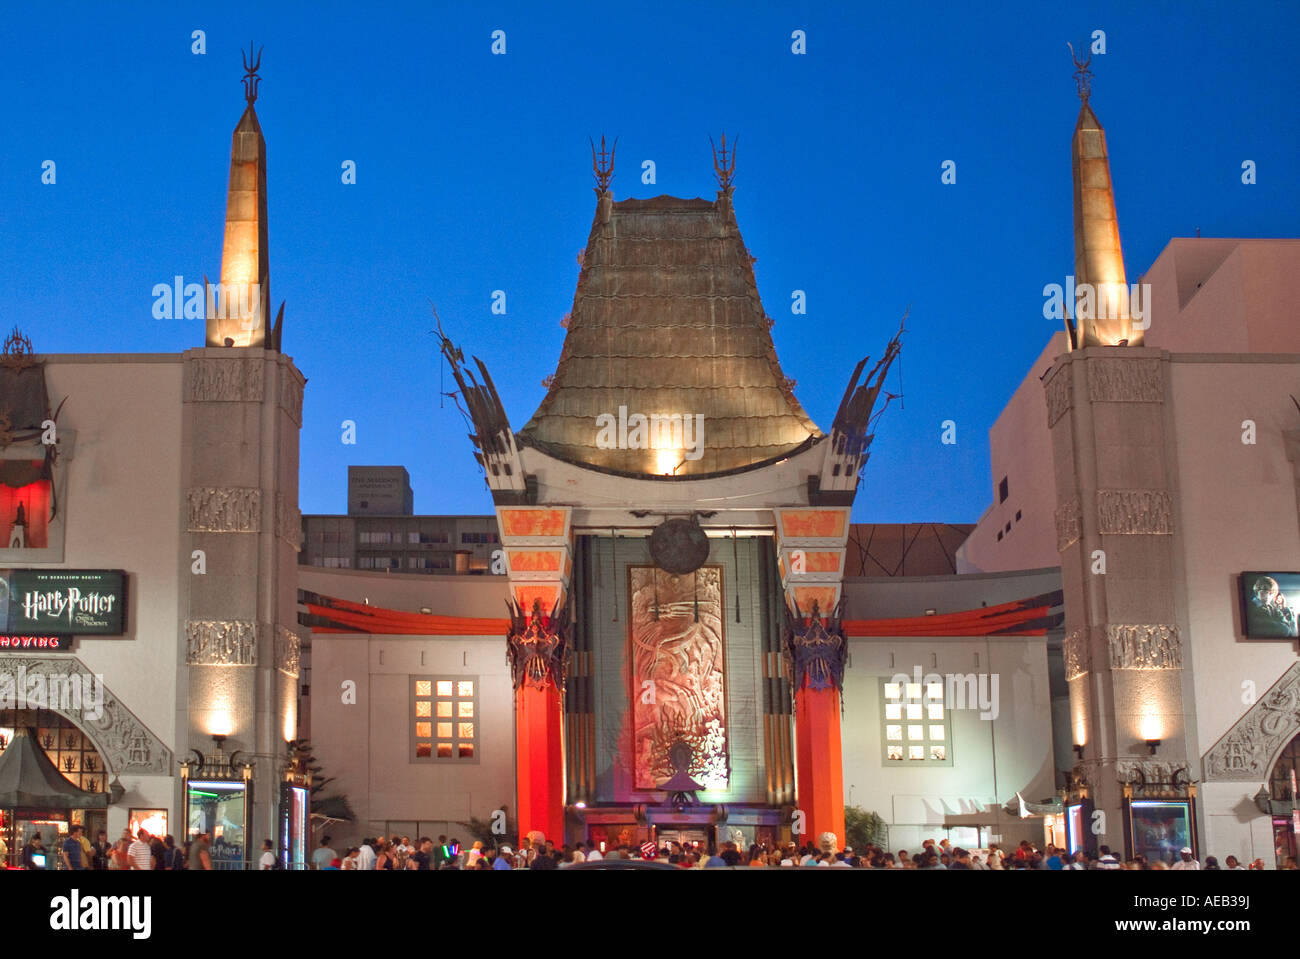 Le Grauman's Chinese Theatre à Hollywood, CA Banque D'Images